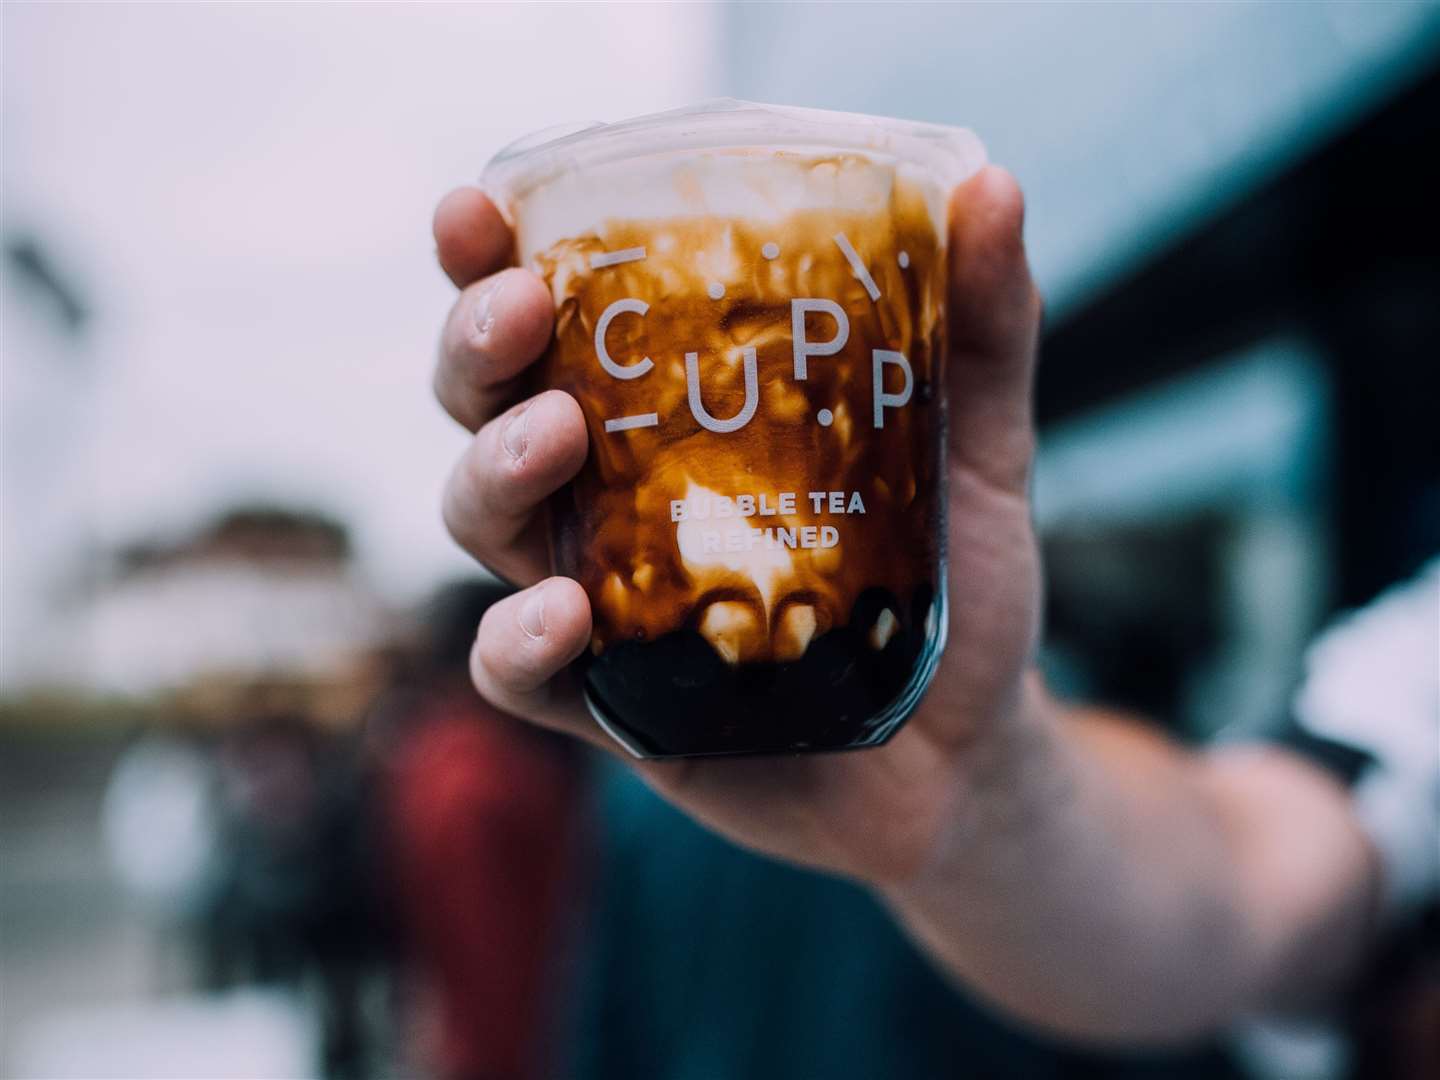 It is set to launch in July. Picture: CUPP Bubble Tea